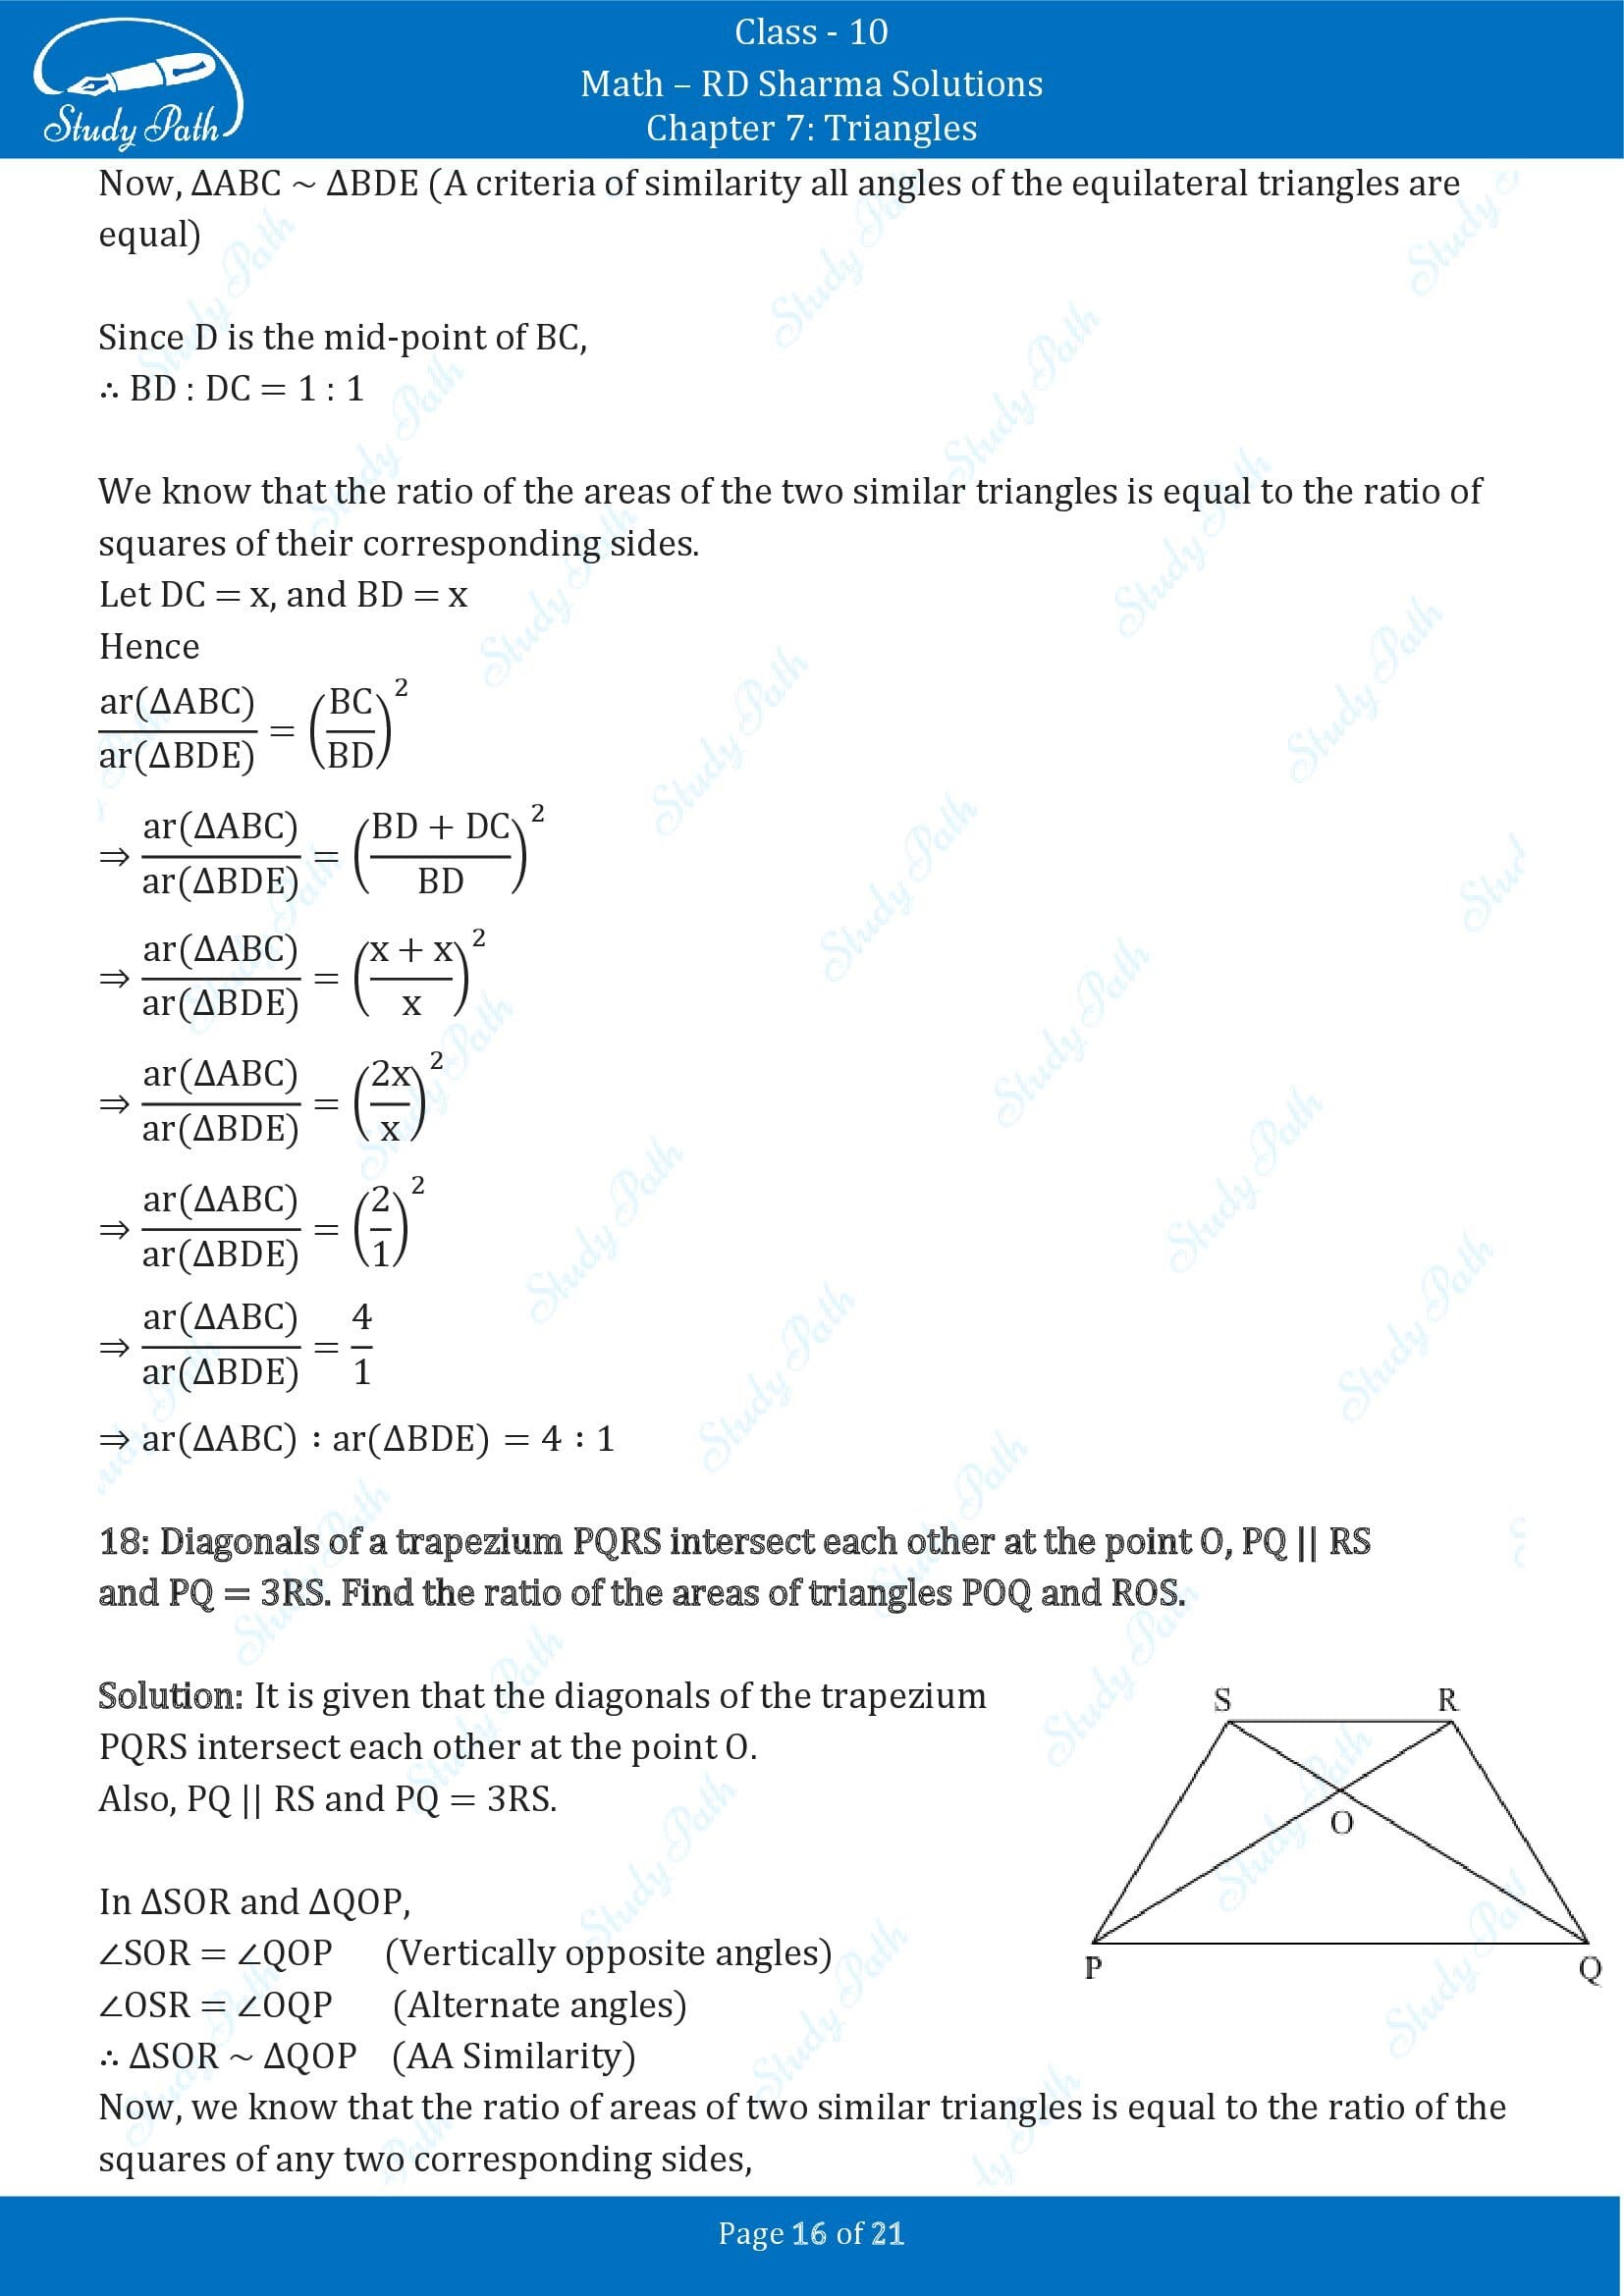 RD Sharma Solutions Class 10 Chapter 7 Triangles Exercise 7.6 00016